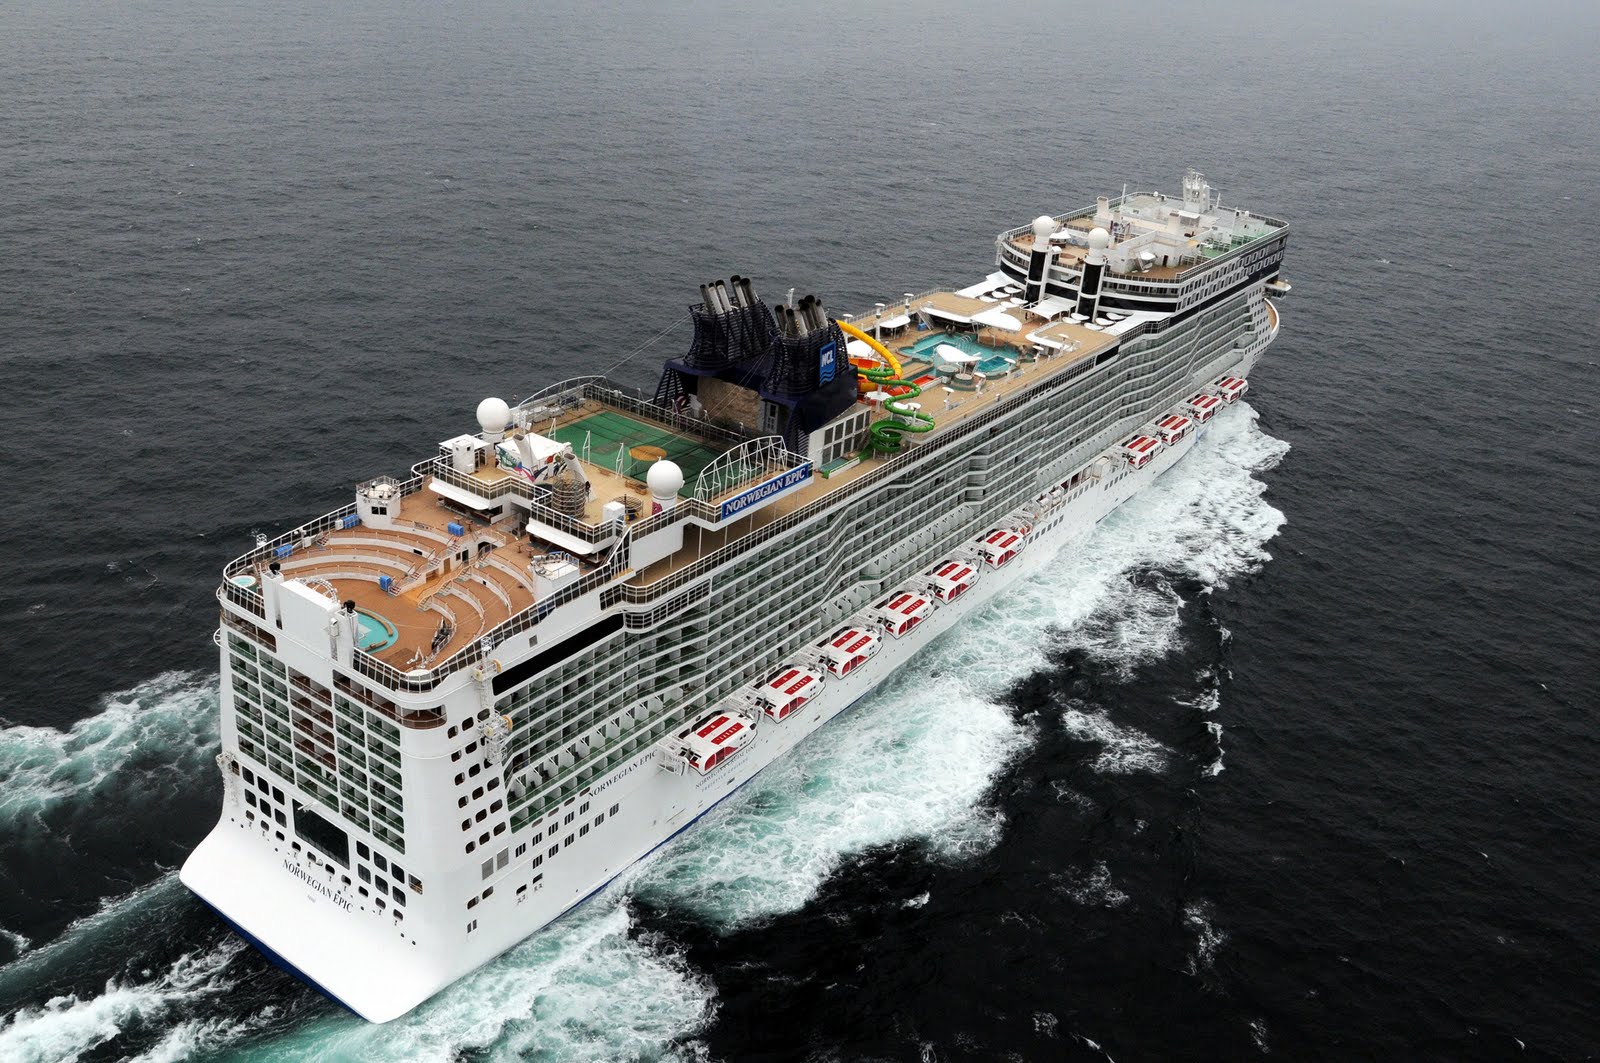 TritonCapeCruze NORWEGIAN EPIC, LARGEST SHIP EVER TO DOCK IN NEW YORK